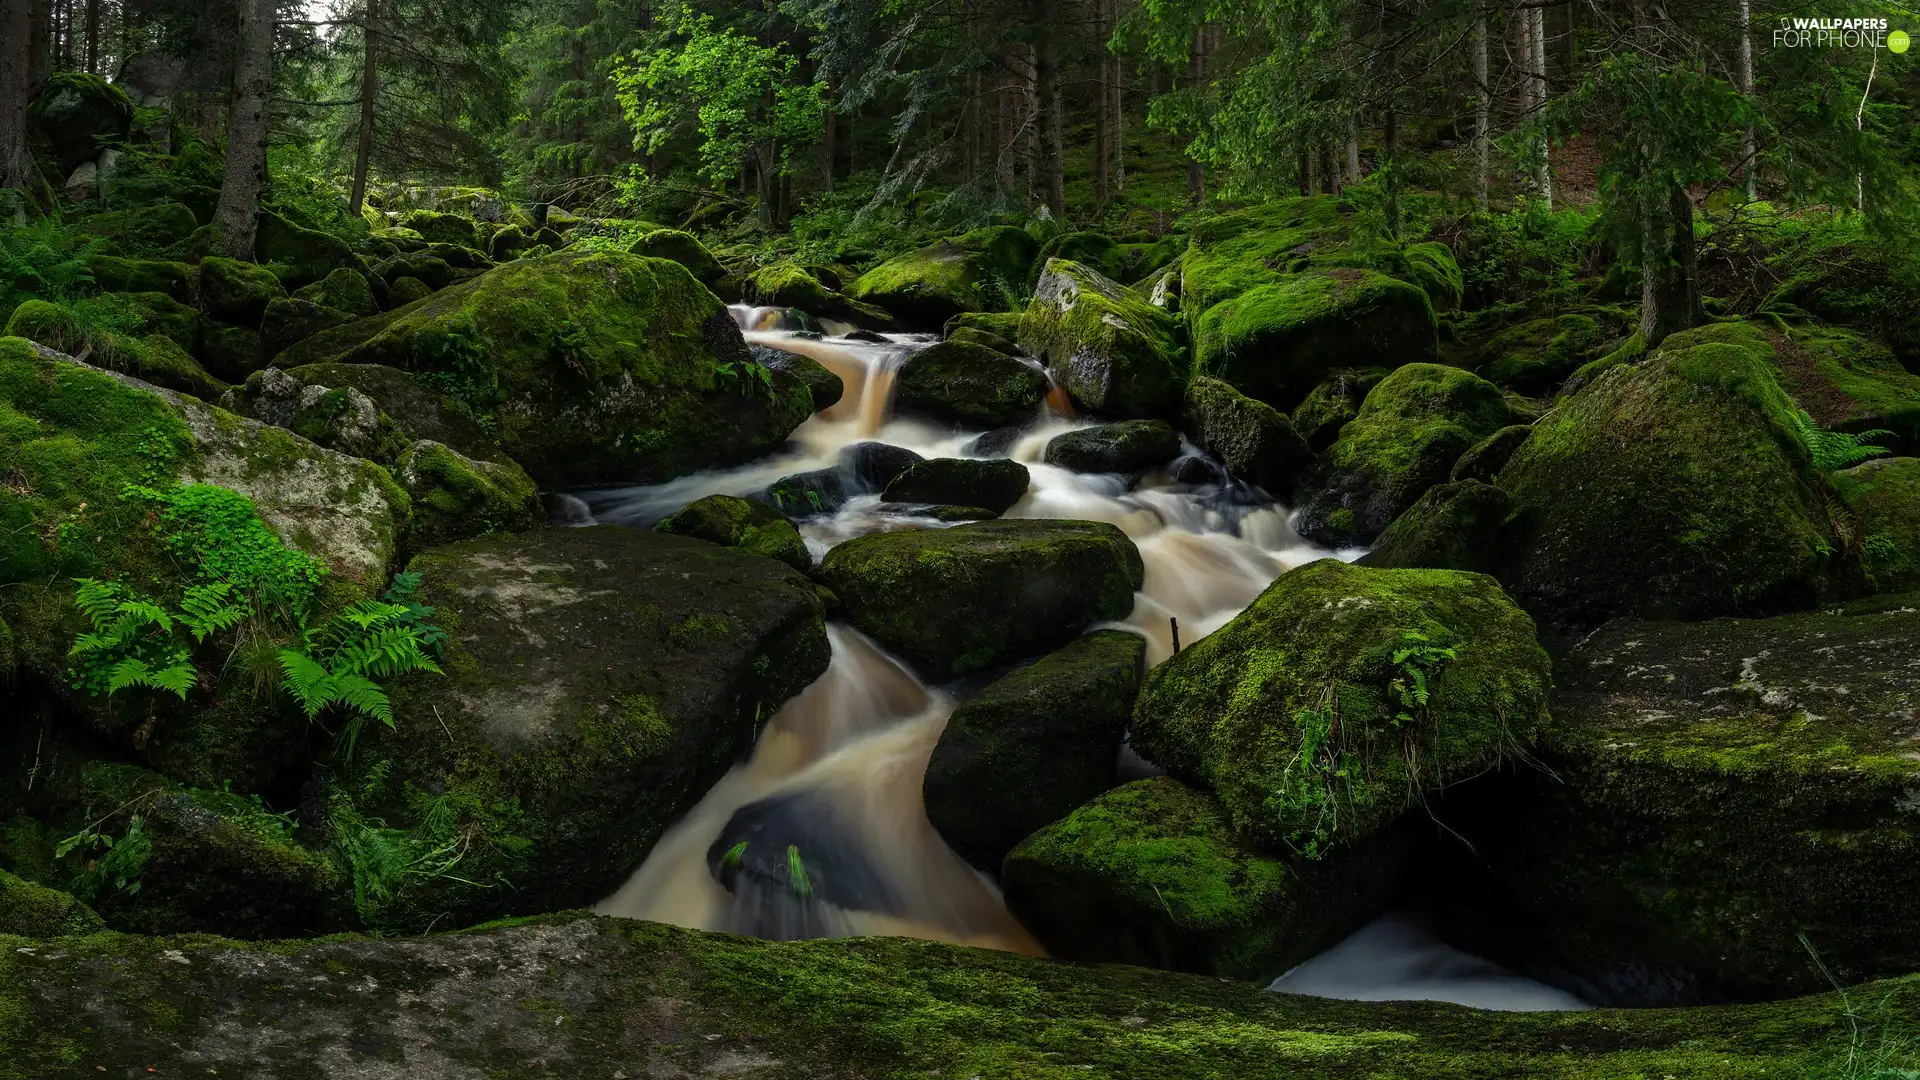 River, fern, mossy, Stones, forest